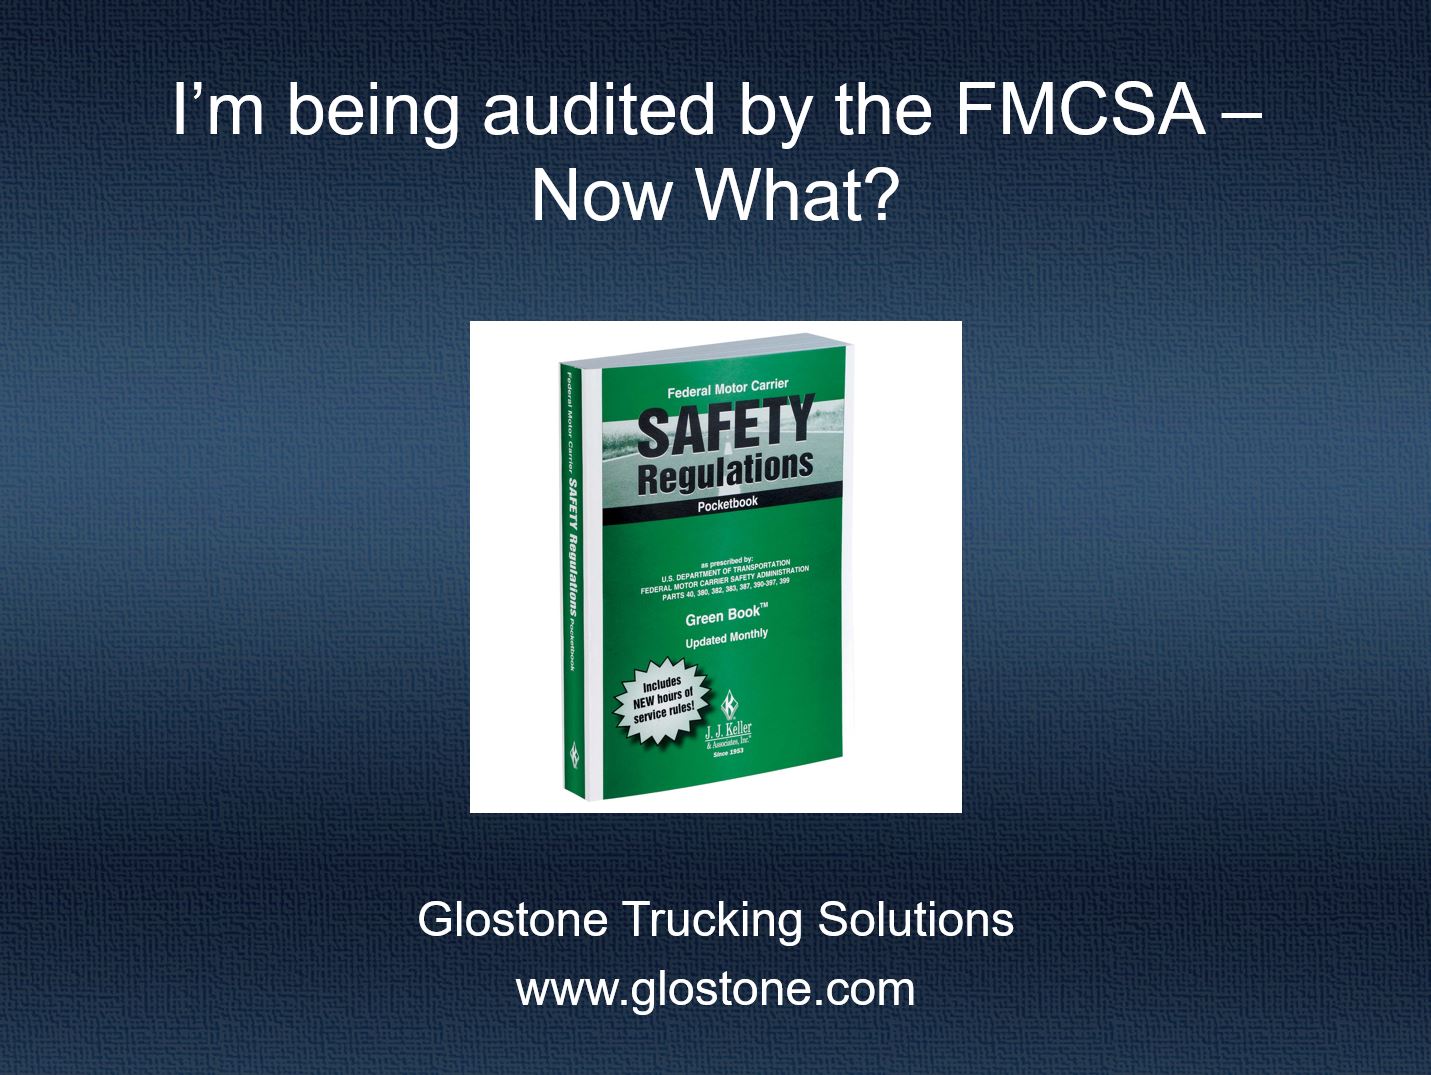 May 2017 webinar: I'm Being Audited By The FMCSA... Now What?